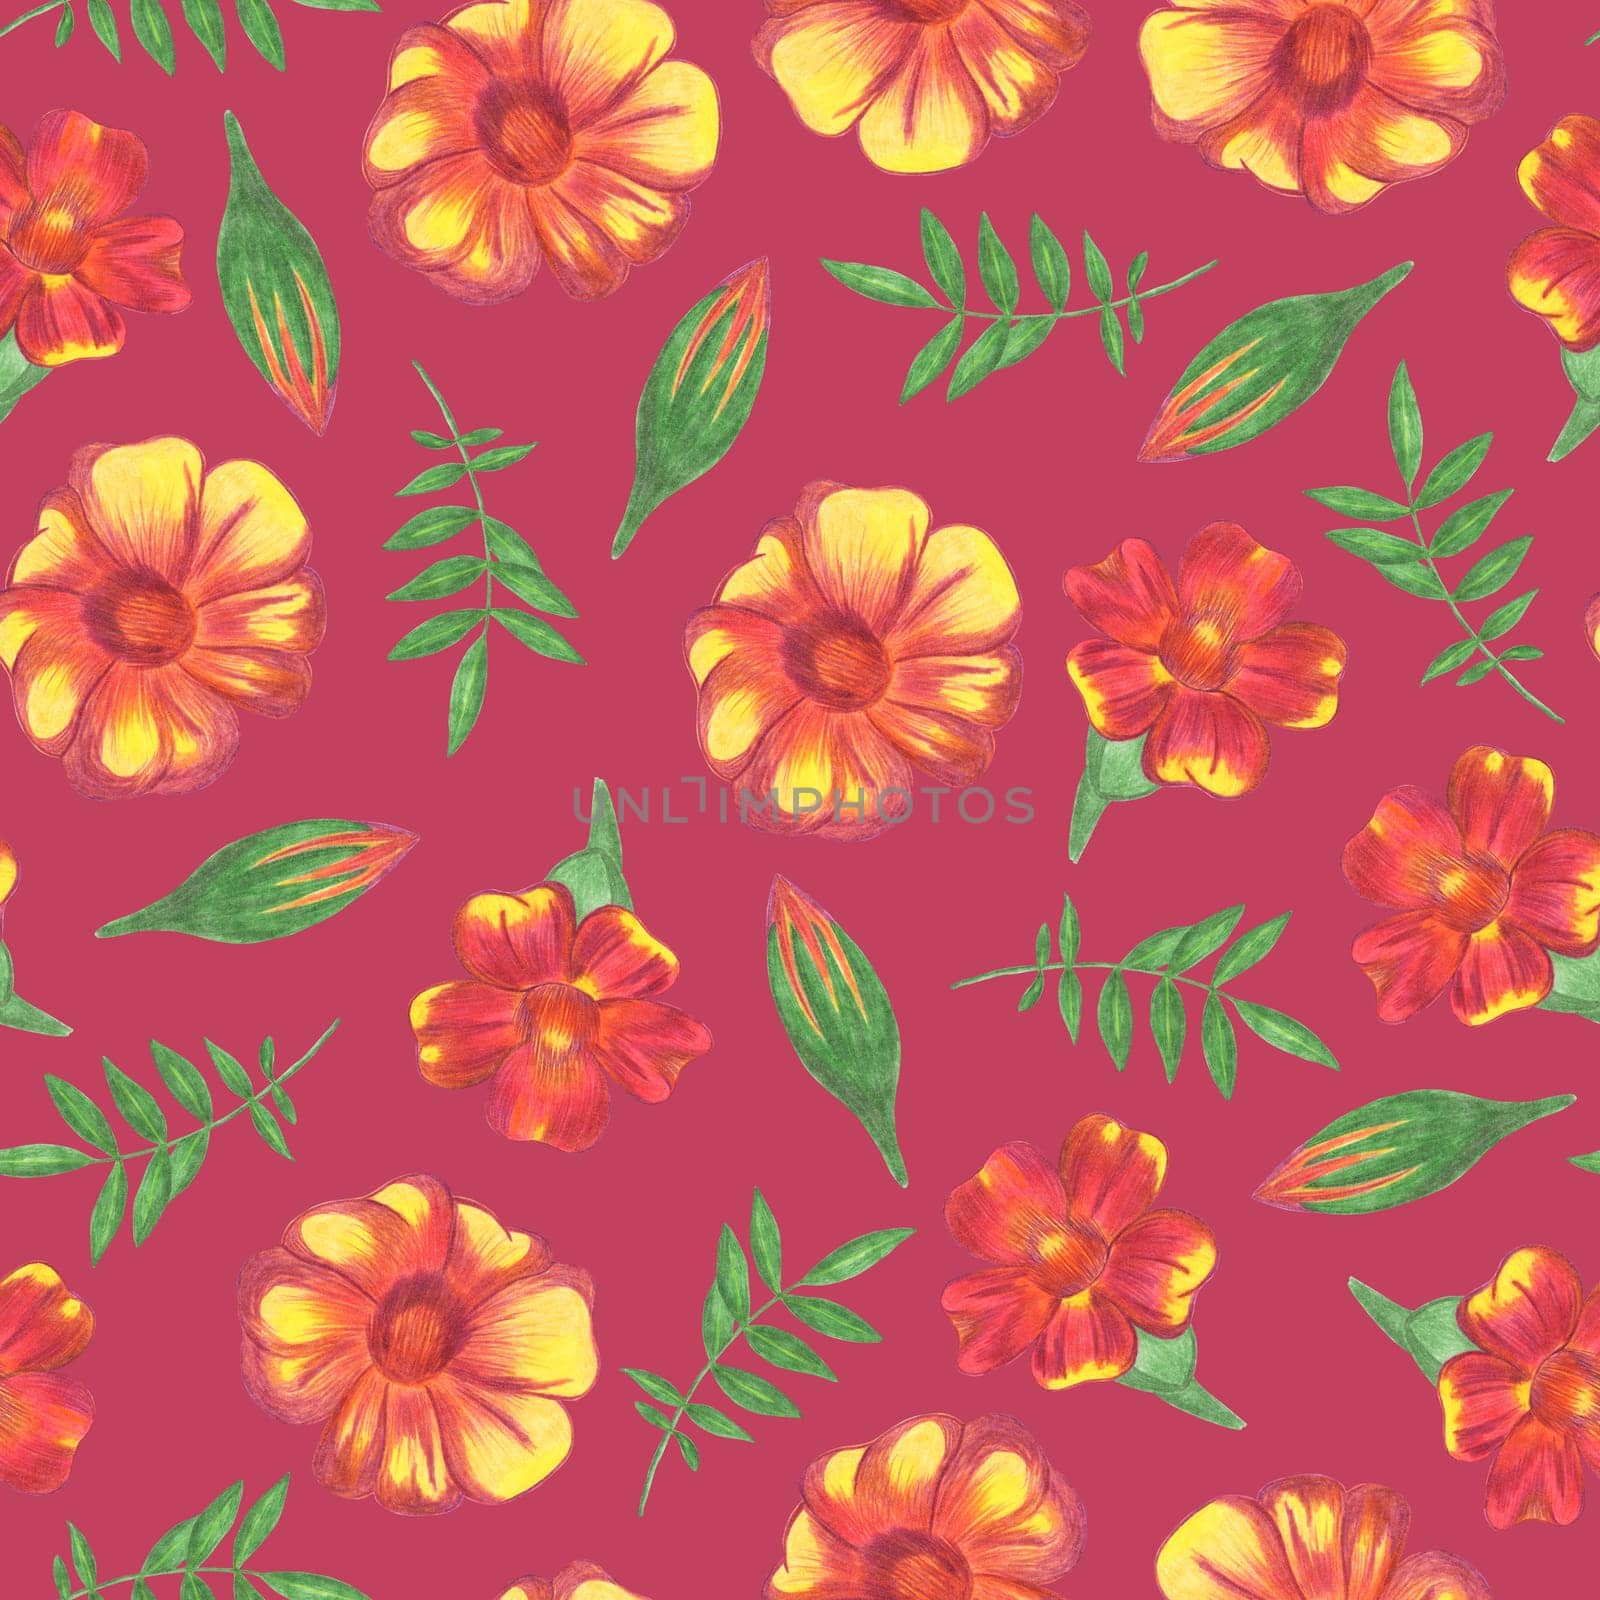 Marigold Flower Seamless Pattern. Hand Drawn Floral Digital Paper on Red Background.